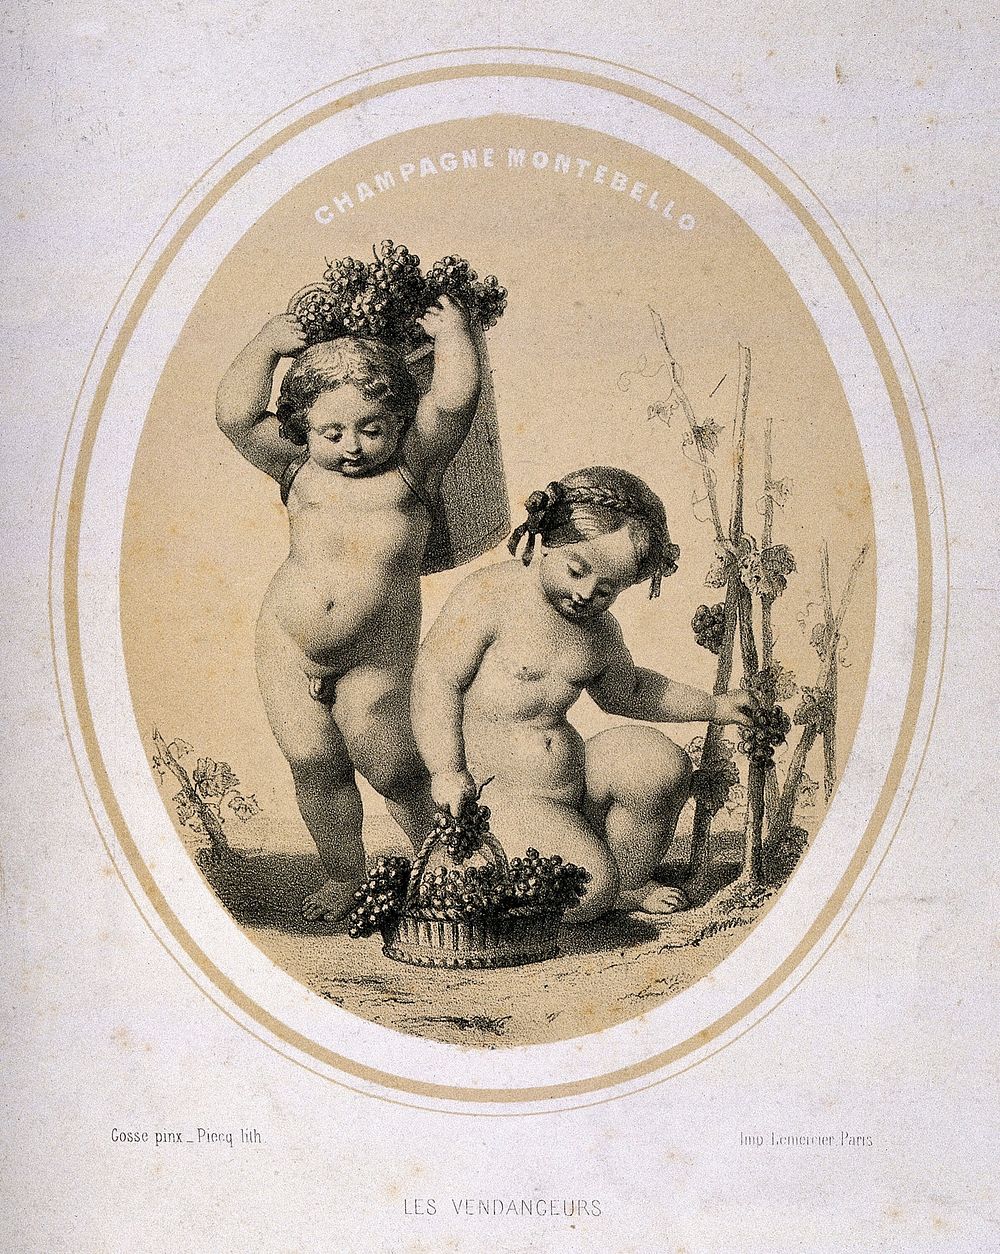 Two naked children picking grapes. Lithograph by Piecq, c. 1845, after Gosse.